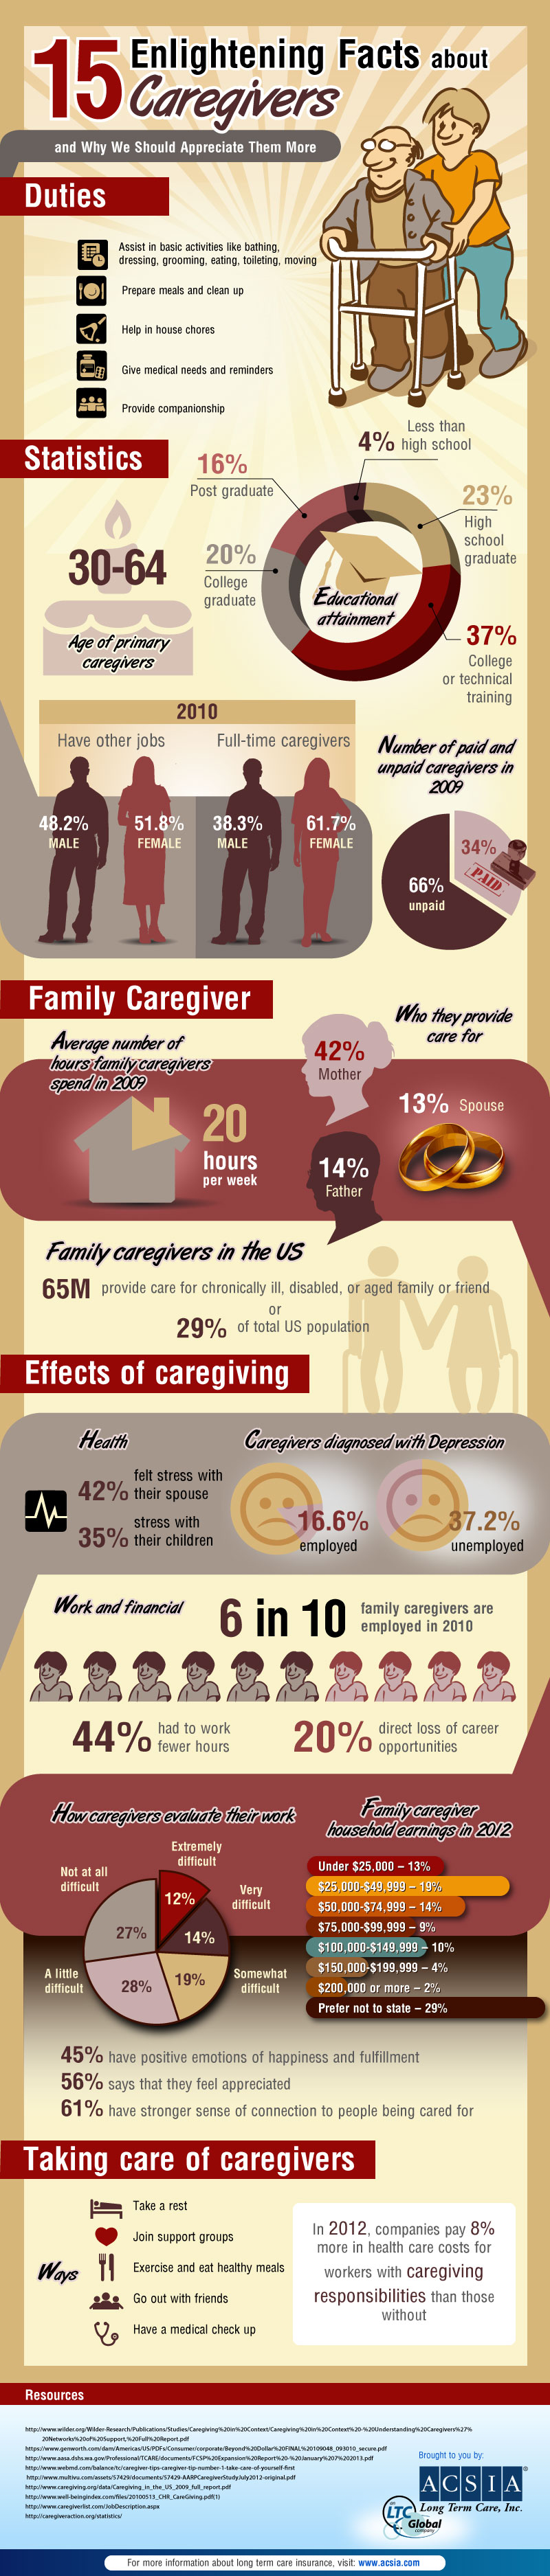 Caregiver Duties and Other Enlightening Facts About Caregivers